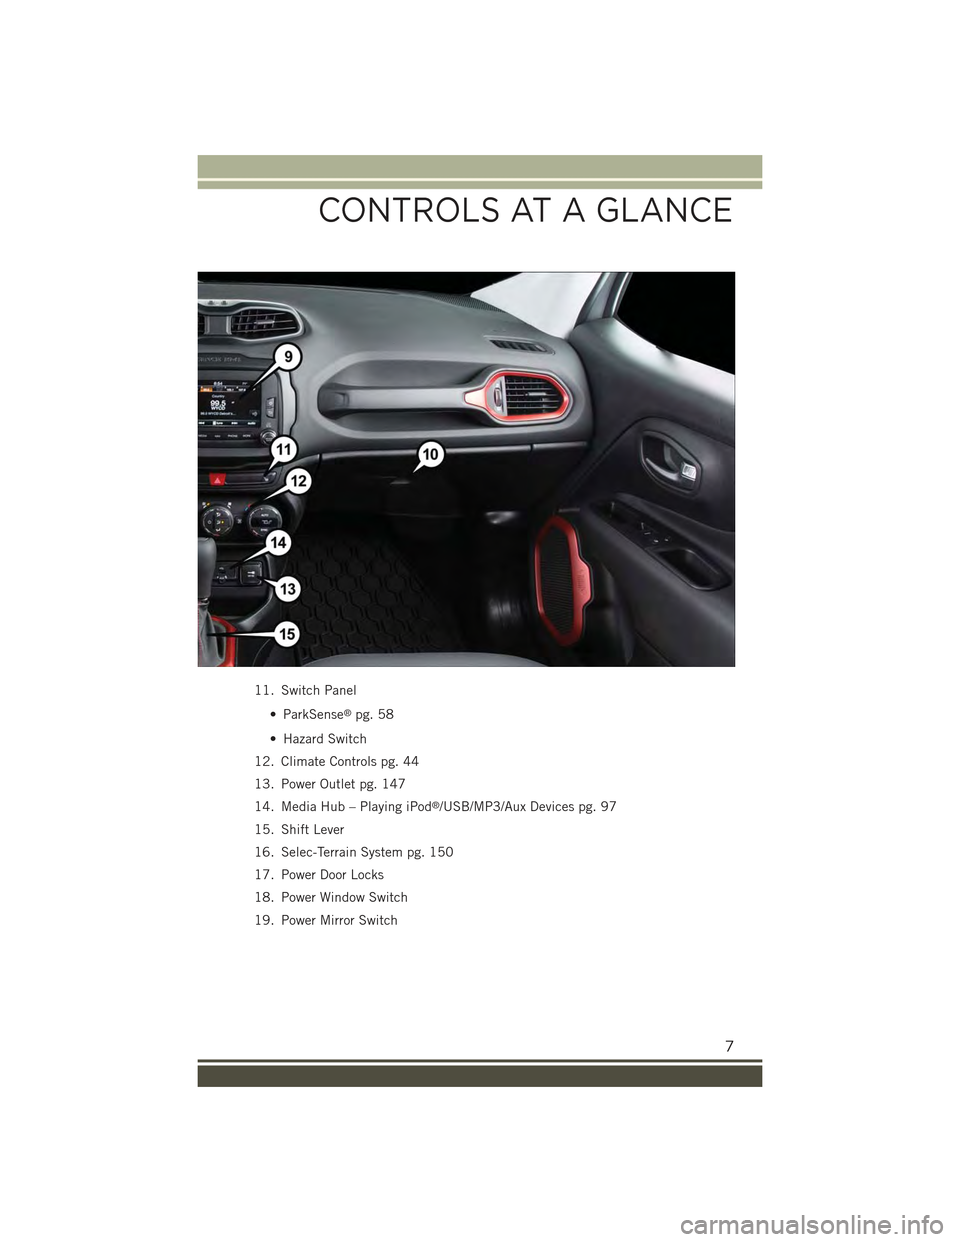 JEEP RENEGADE 2015 1.G User Guide 11. Switch Panel
• ParkSense®pg. 58
• Hazard Switch
12. Climate Controls pg. 44
13. Power Outlet pg. 147
14. Media Hub – Playing iPod®/USB/MP3/Aux Devices pg. 97
15. Shift Lever
16. Selec-Terr